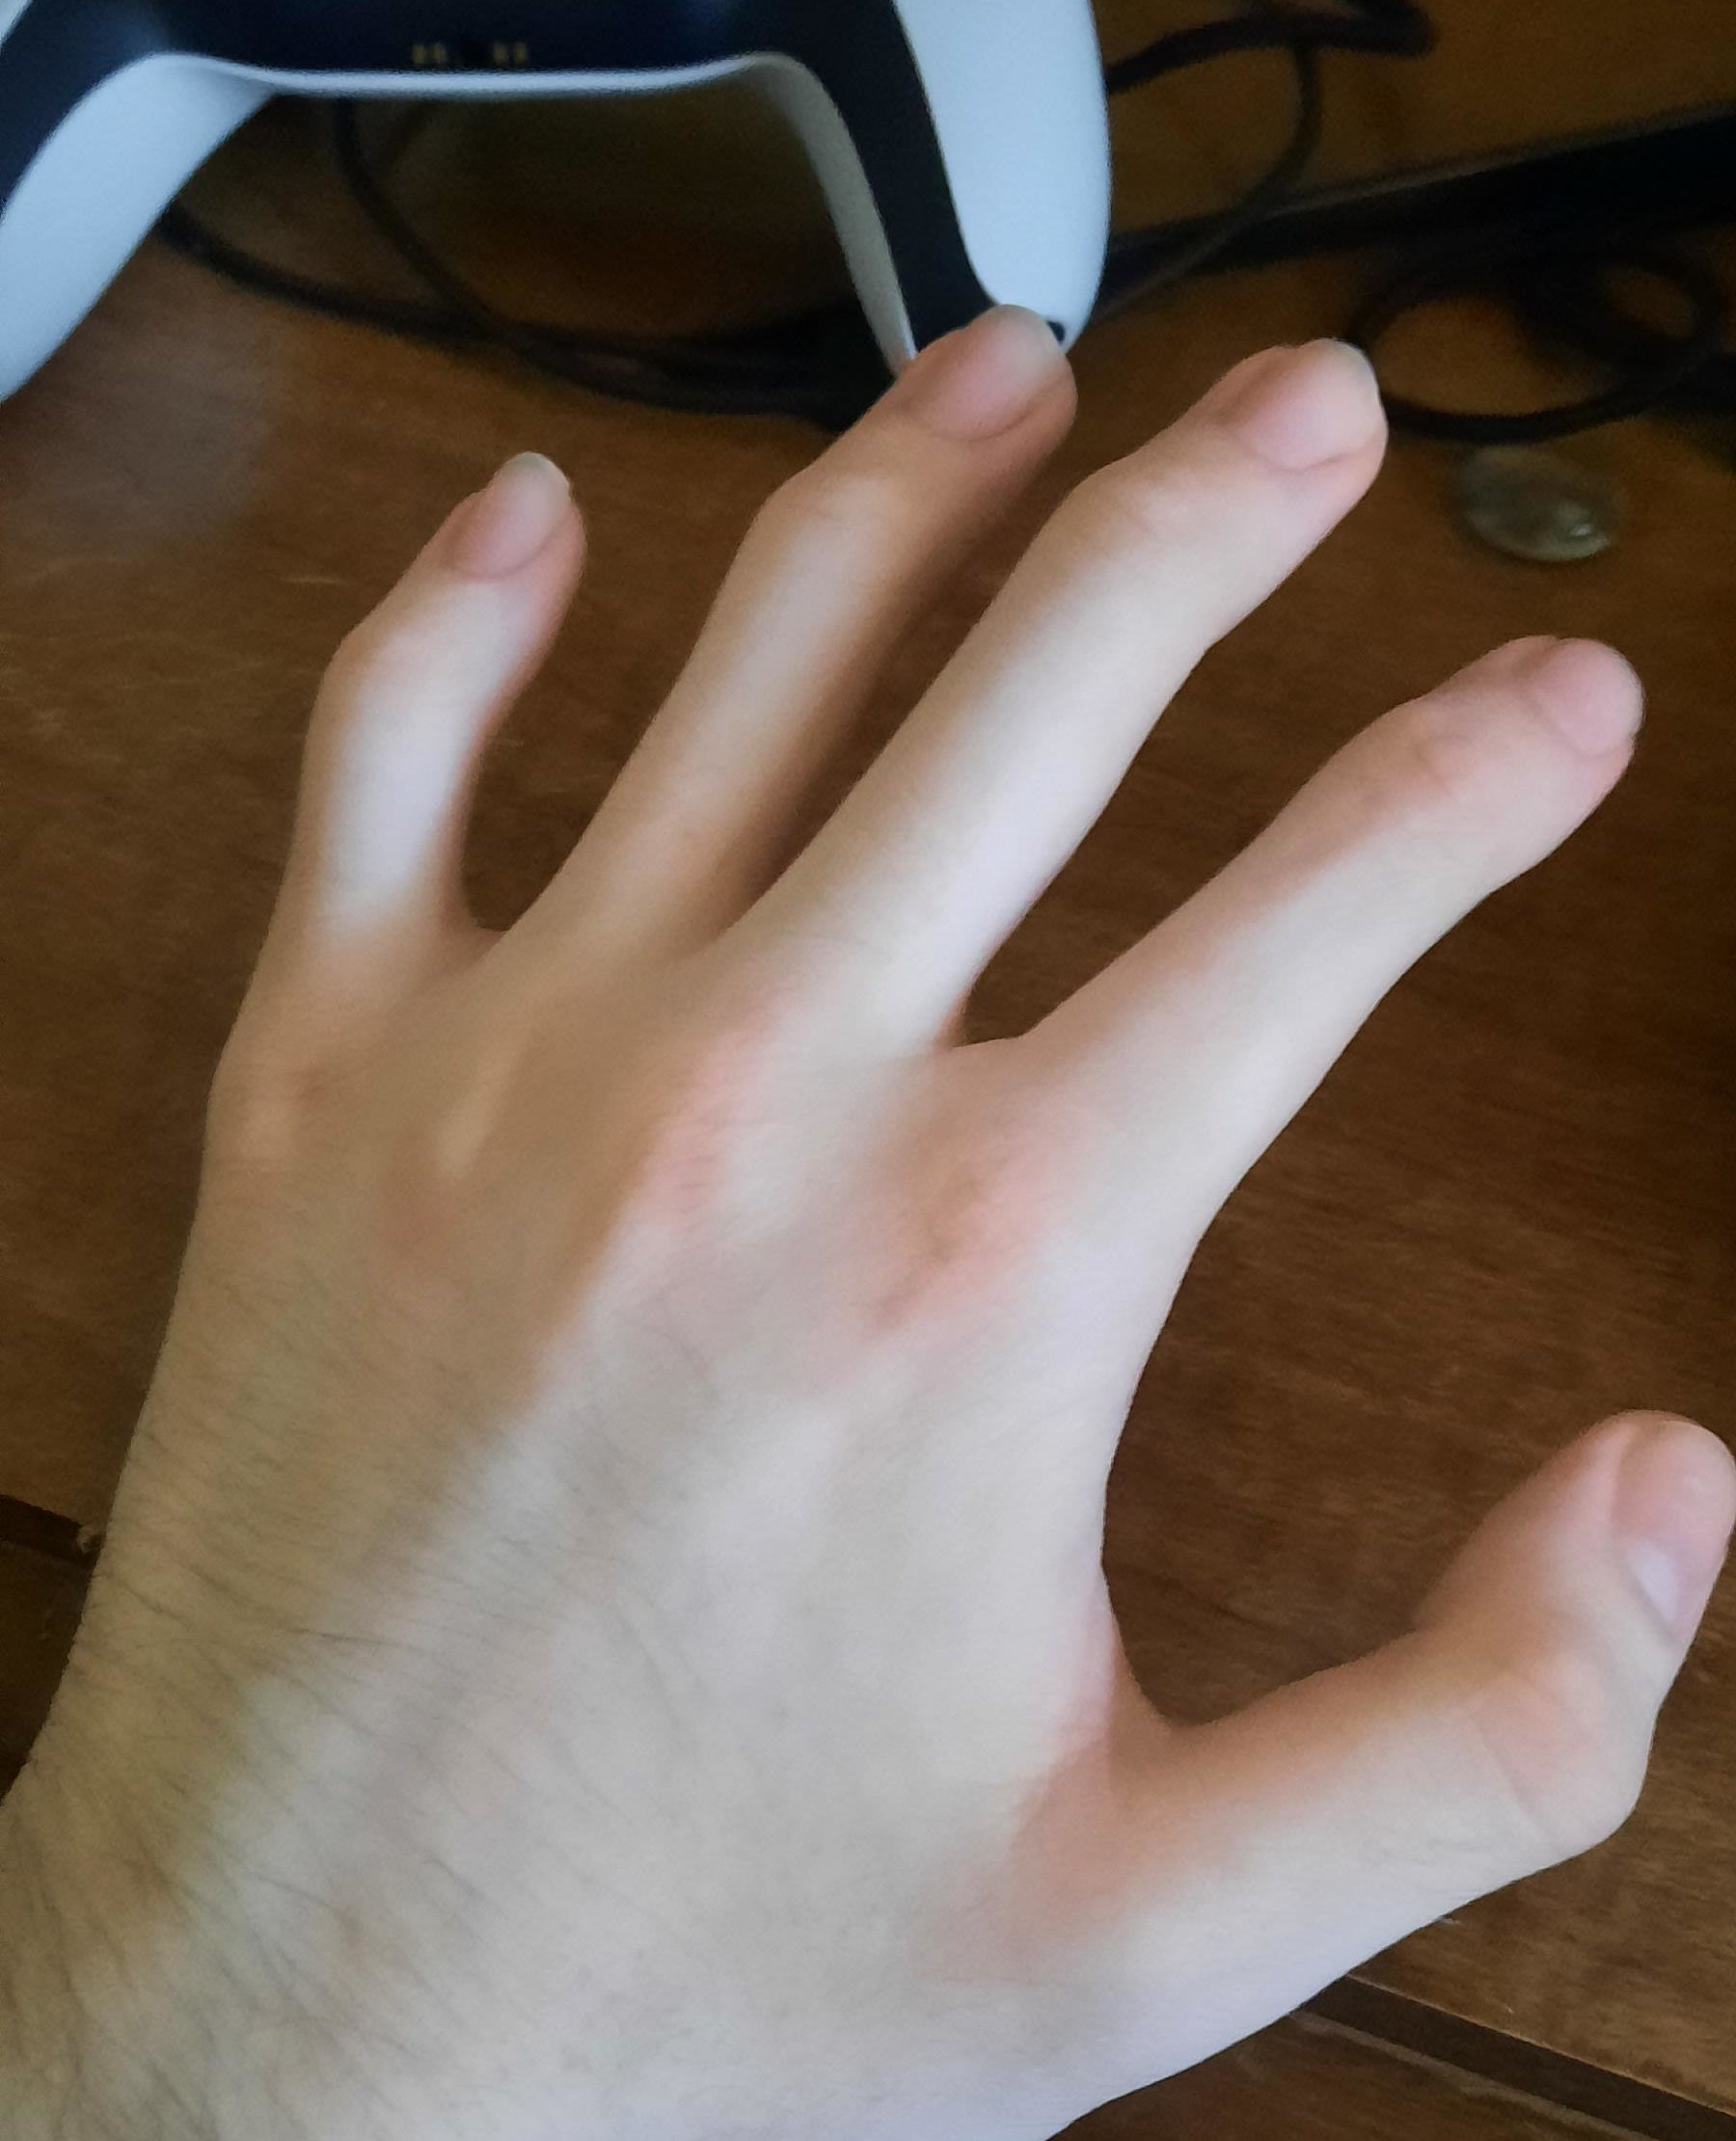 A hand missing middle knuckles